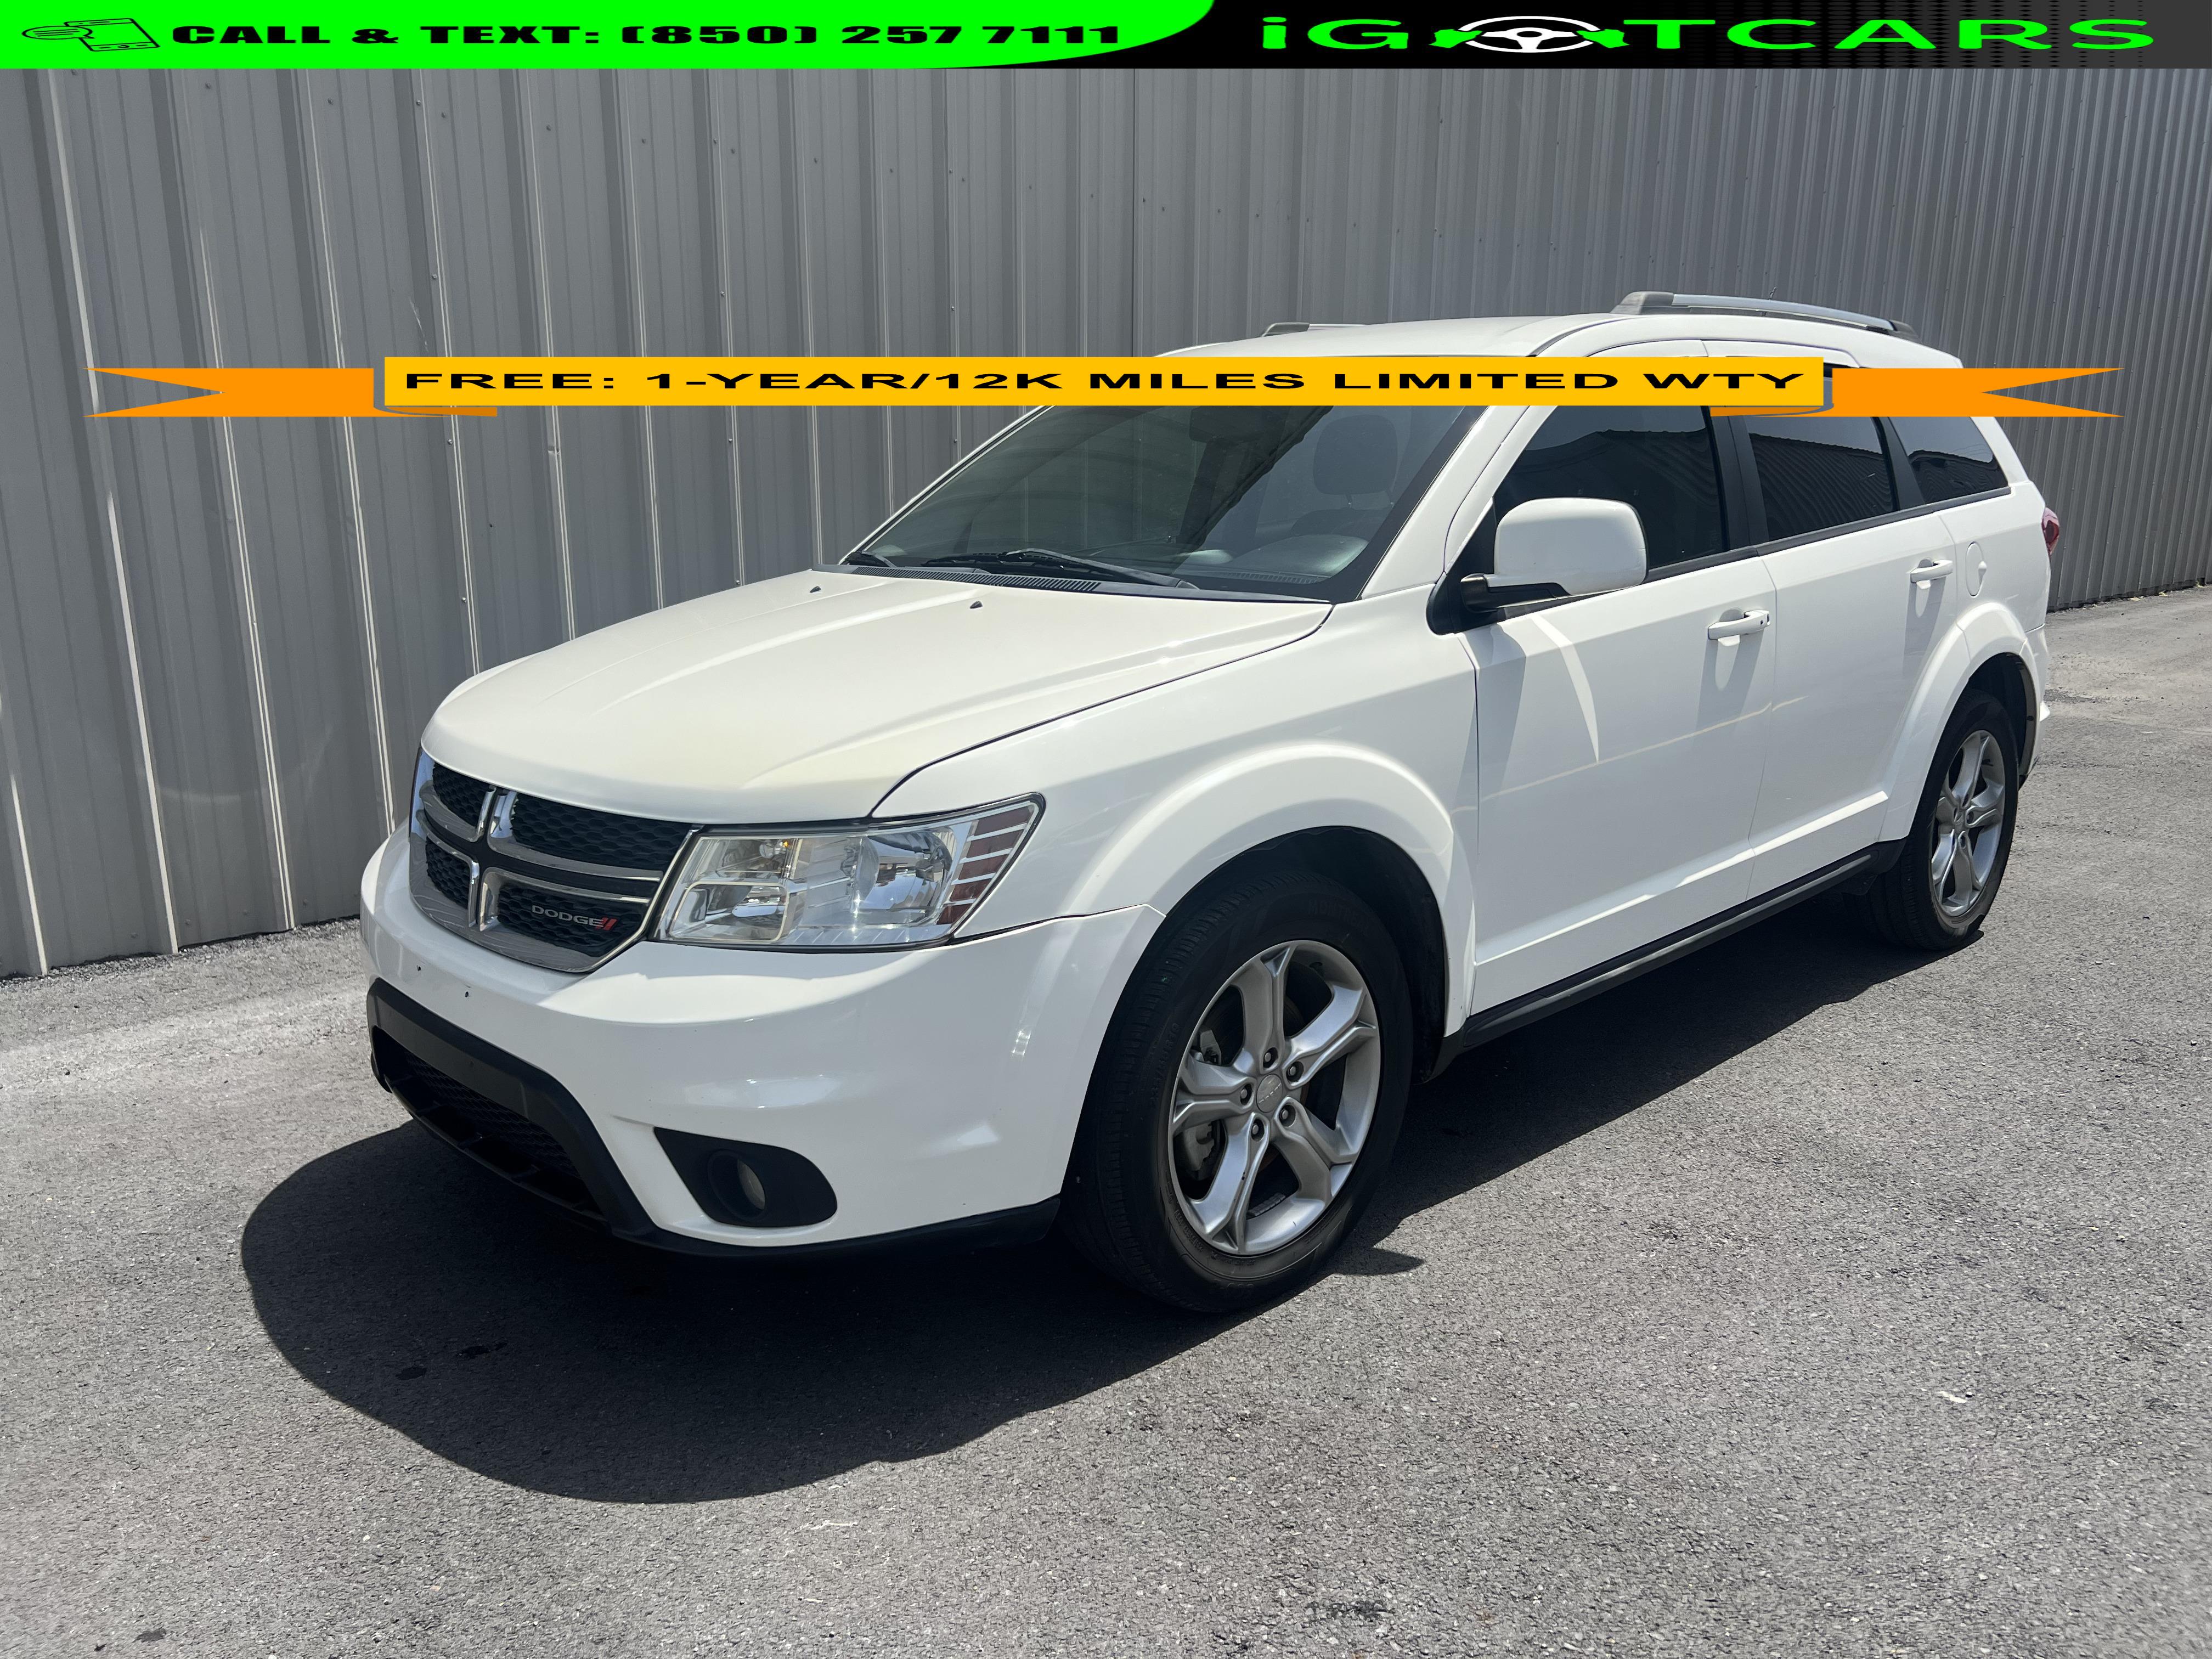 Used 2017 Dodge Journey for sale in Houston TX.  We Finance! 